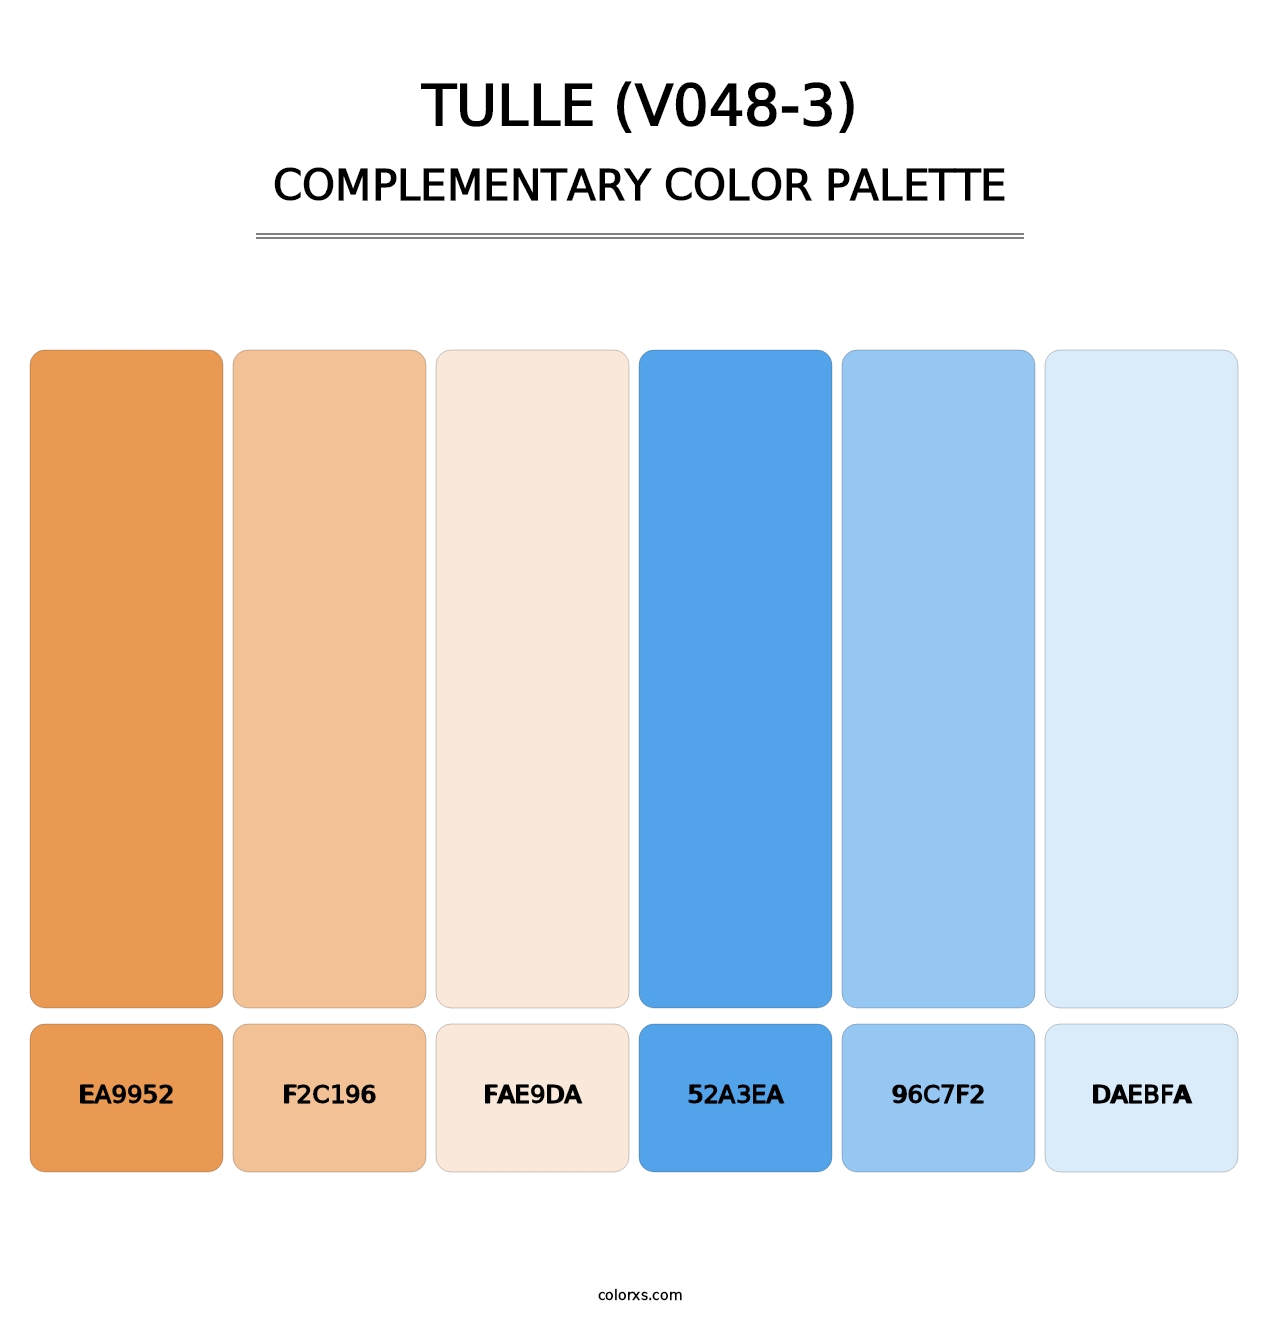 Tulle (V048-3) - Complementary Color Palette